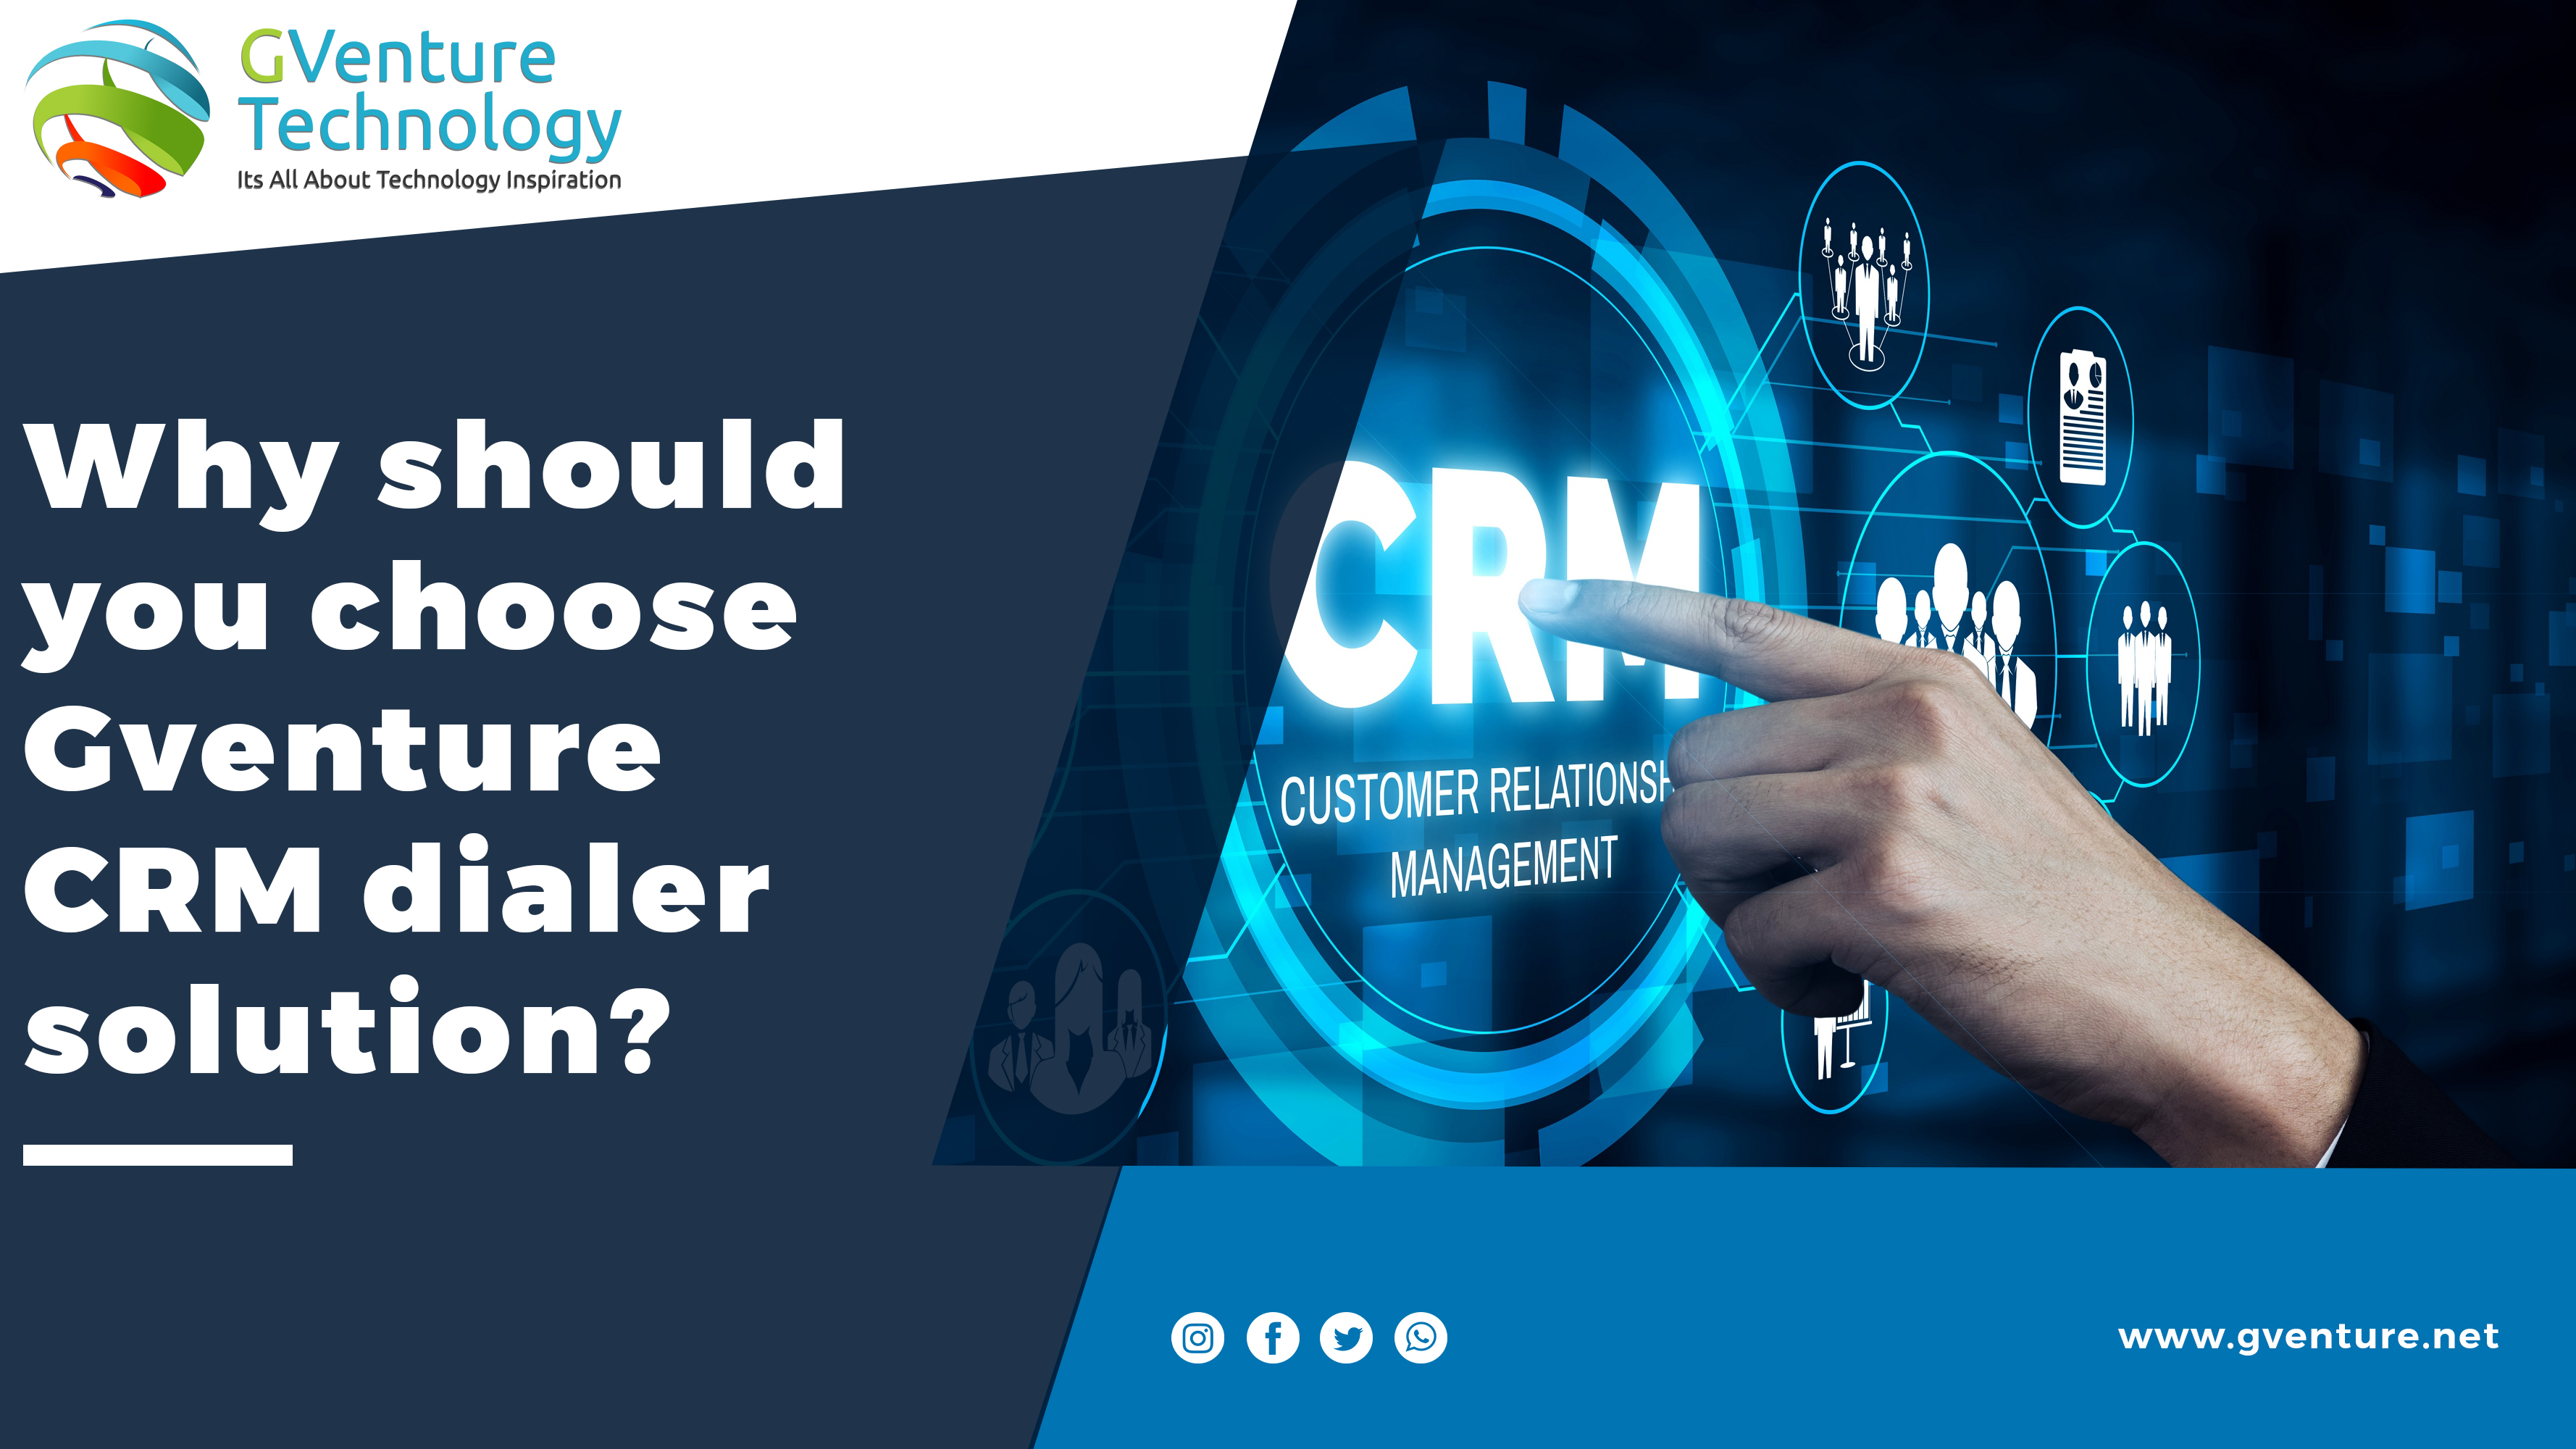  Why should you choose Gventure CRM dialer solution?